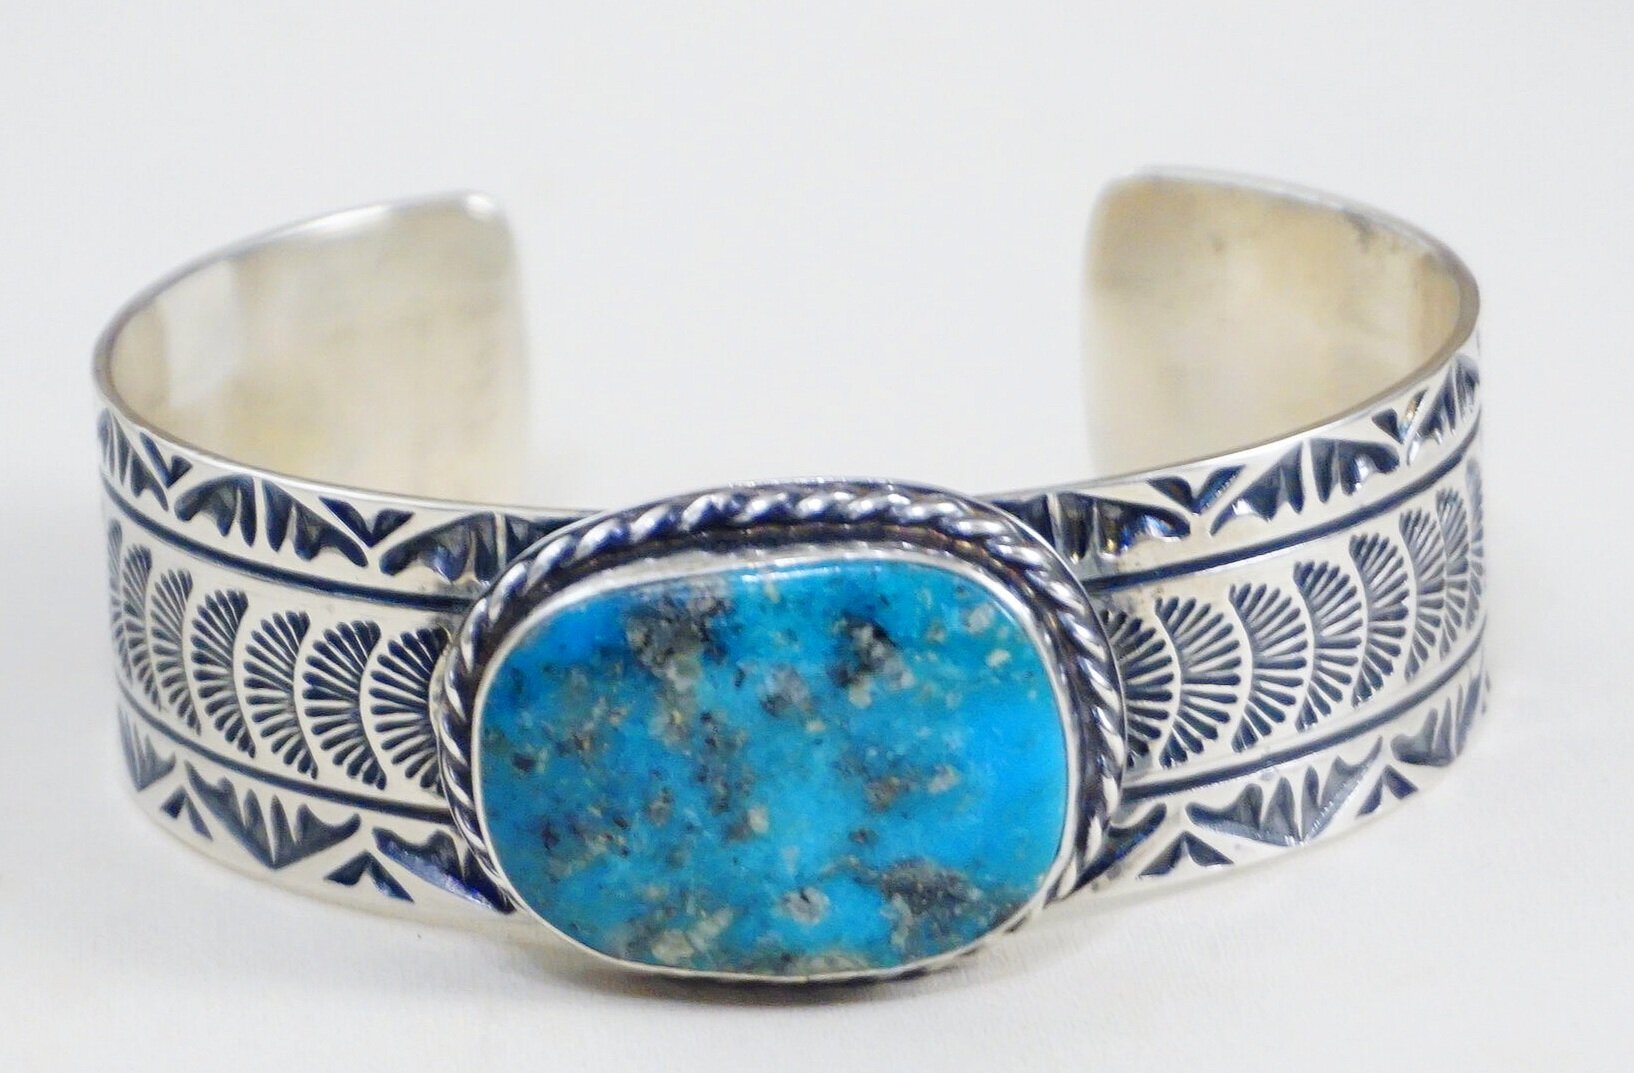 Turquoise Jewelry Gifts For Women Turquoise Cuff Bracelet Blue Gemstone Cuff Bracelet Turquoise Bracelet Wire Wrapped Jewelry